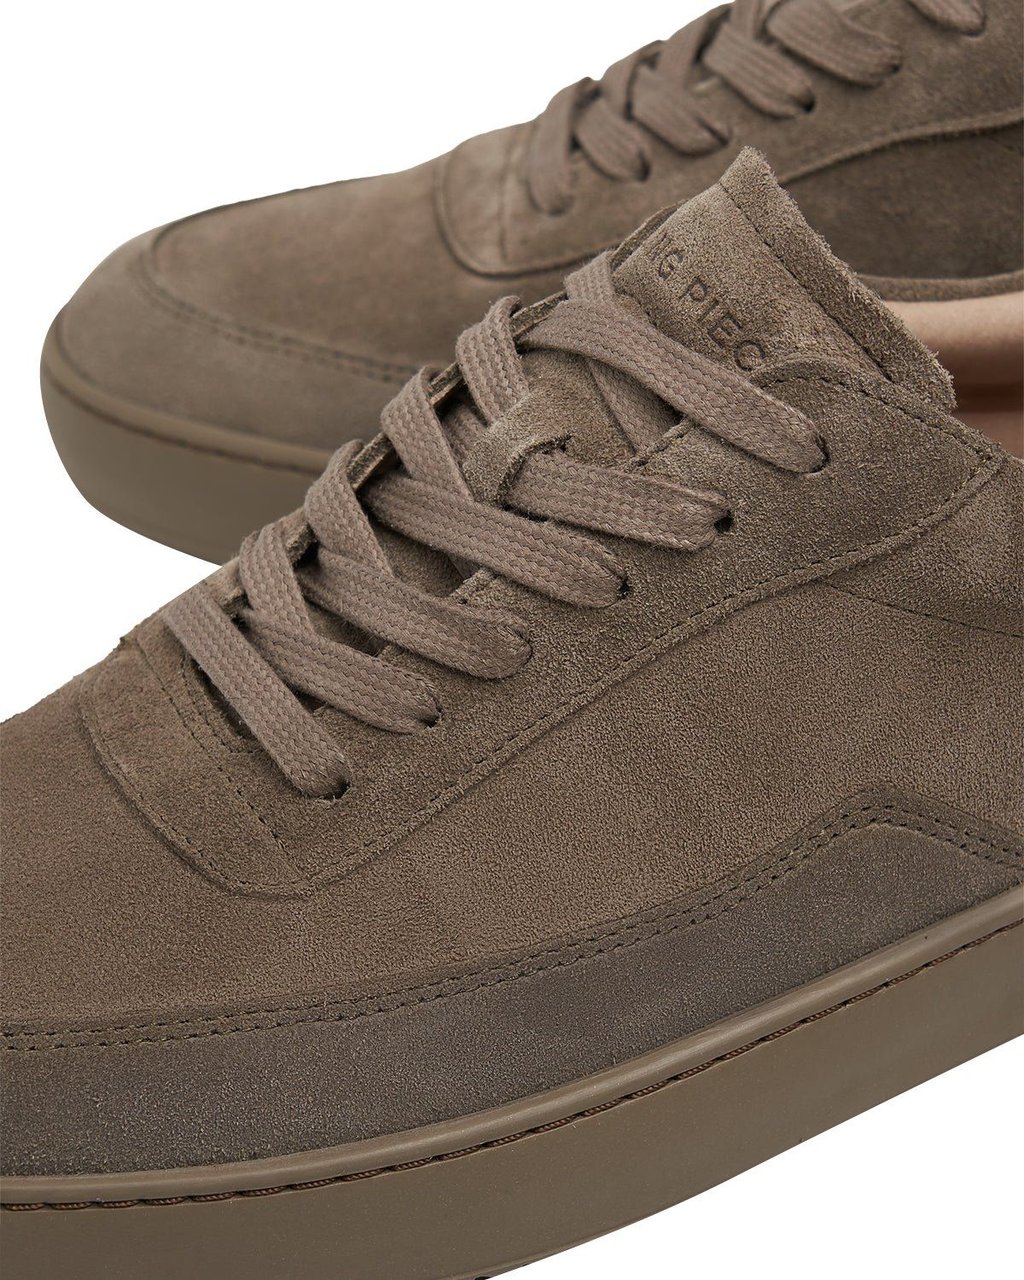 Filling Pieces Mondo Suede All Taupe Bruin